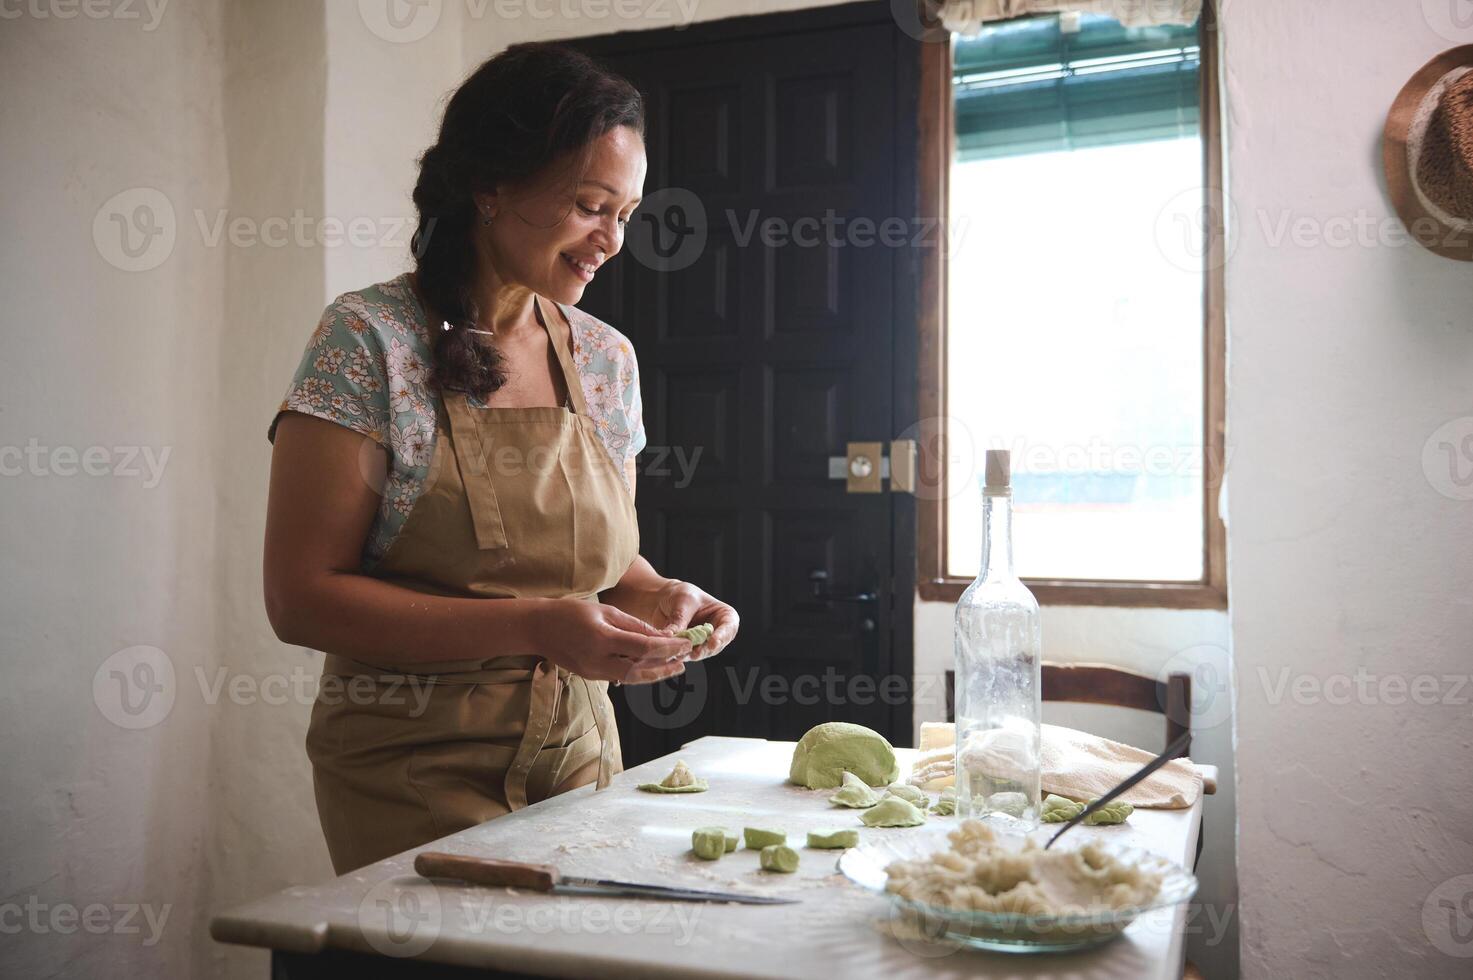 Authentic portrait of multi ethnic young charming woman, housewife in beige apron, standing at kitchen table with ingredients and spinach dough, modeling dumplings in rural kitchen rustic interior photo